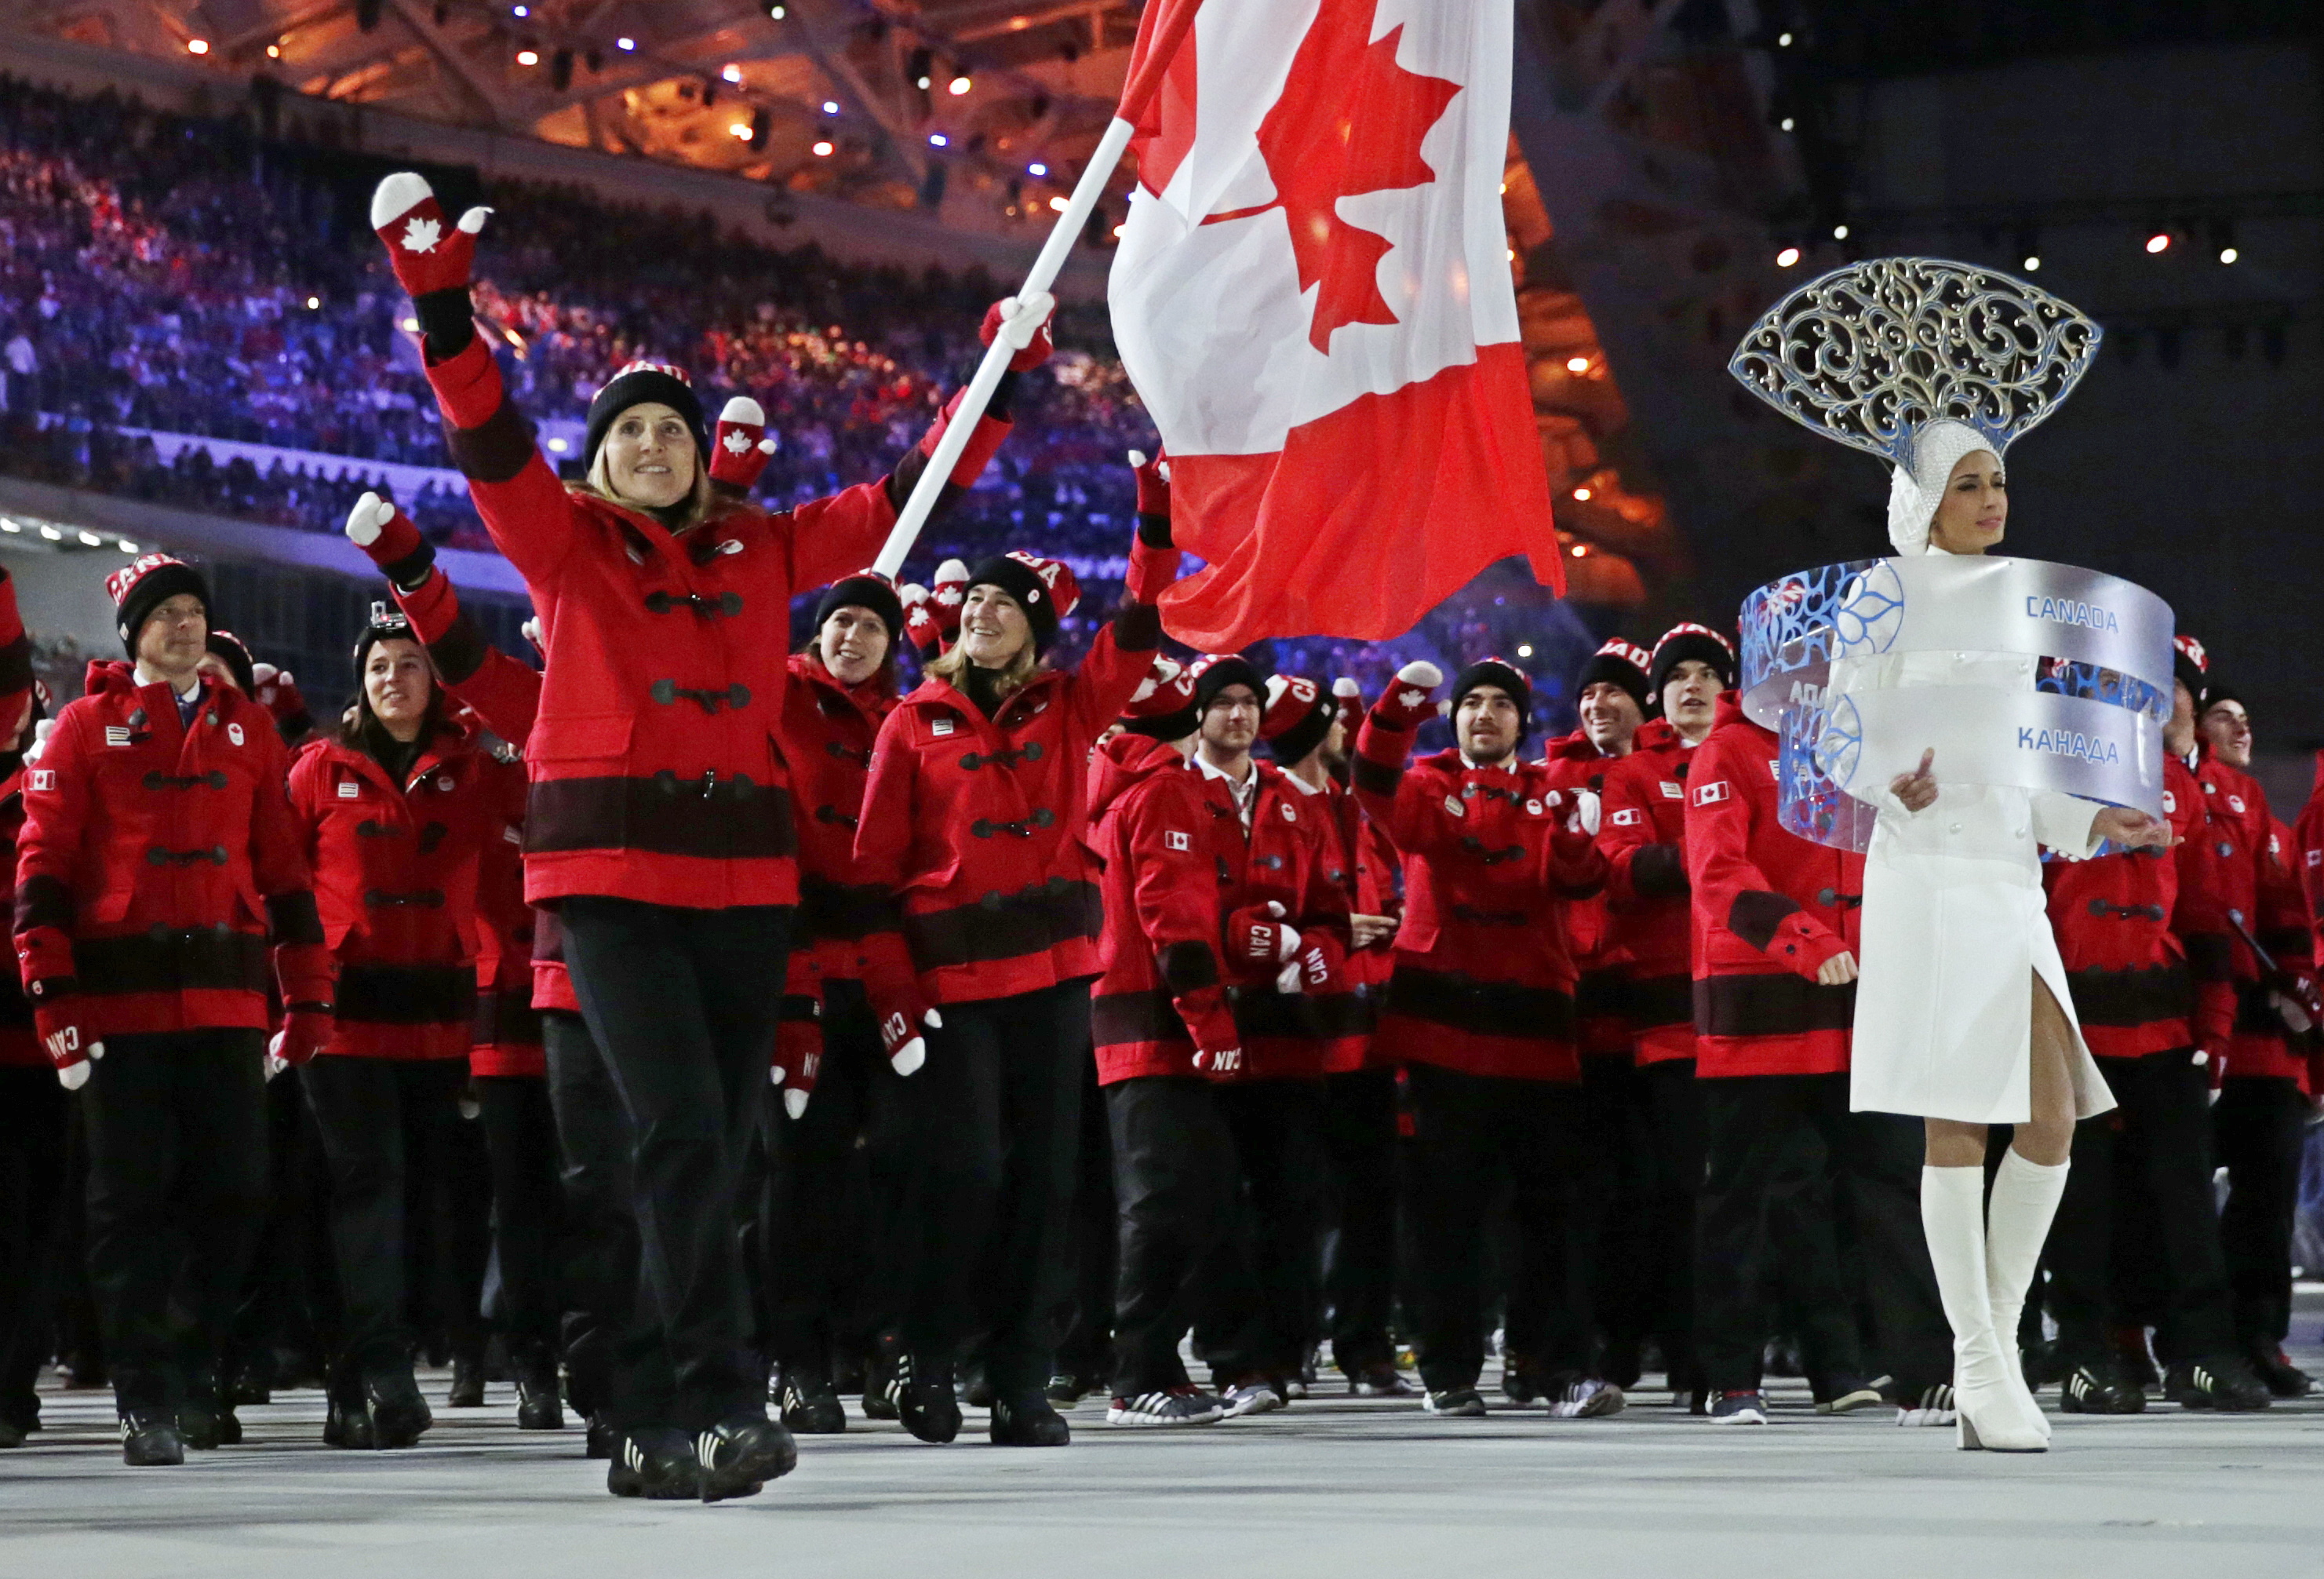 Team Canada at the opening of the Olympic Games in Sochi wallpapers and